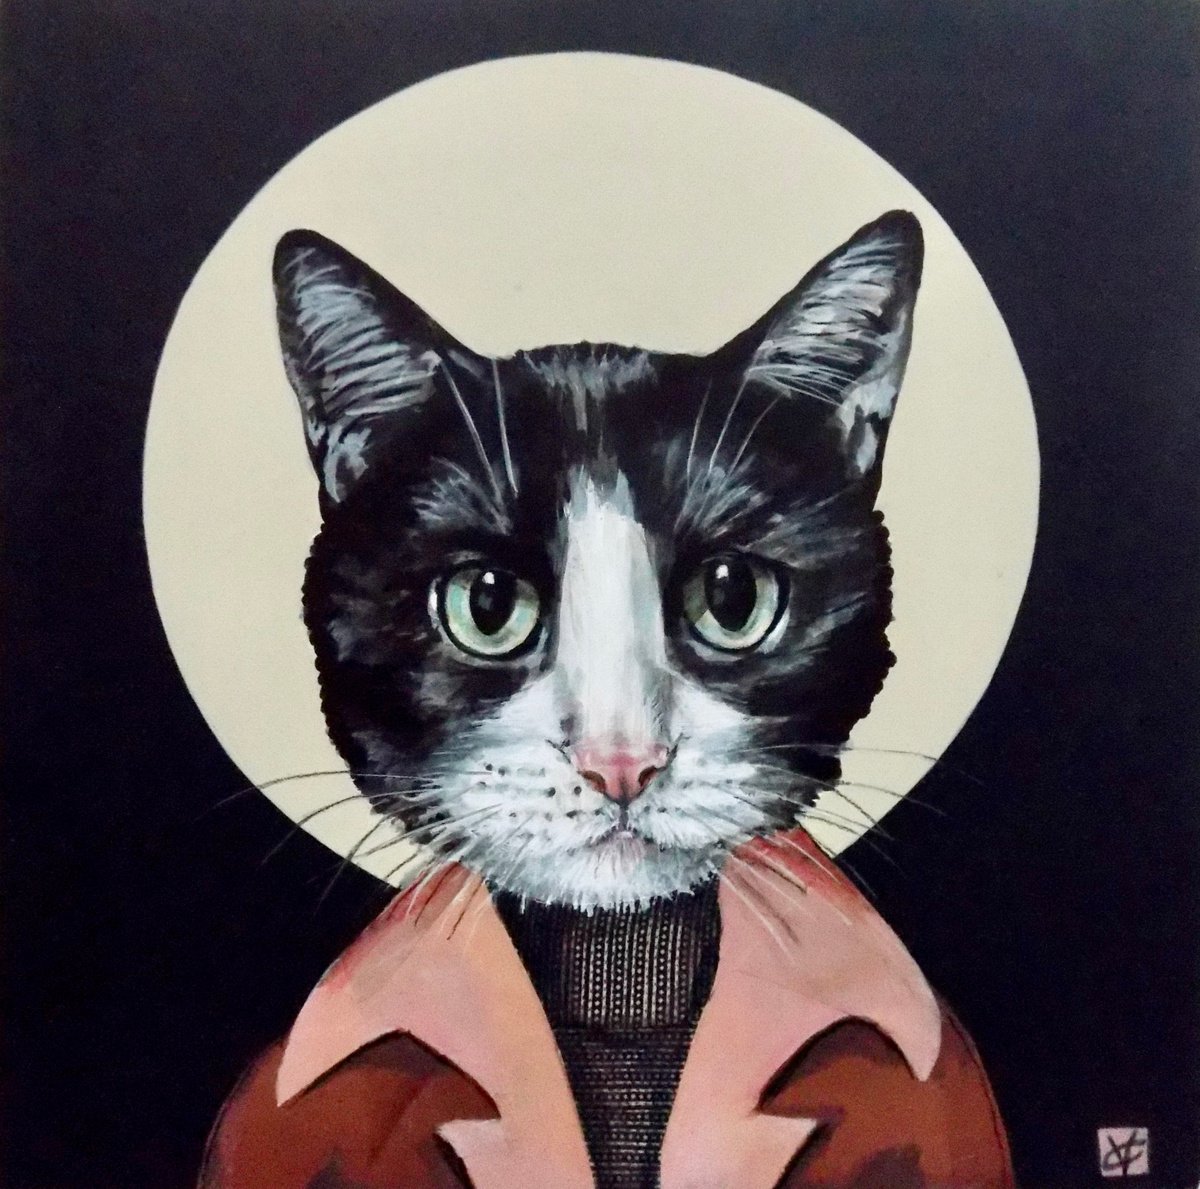 Cat painting called 